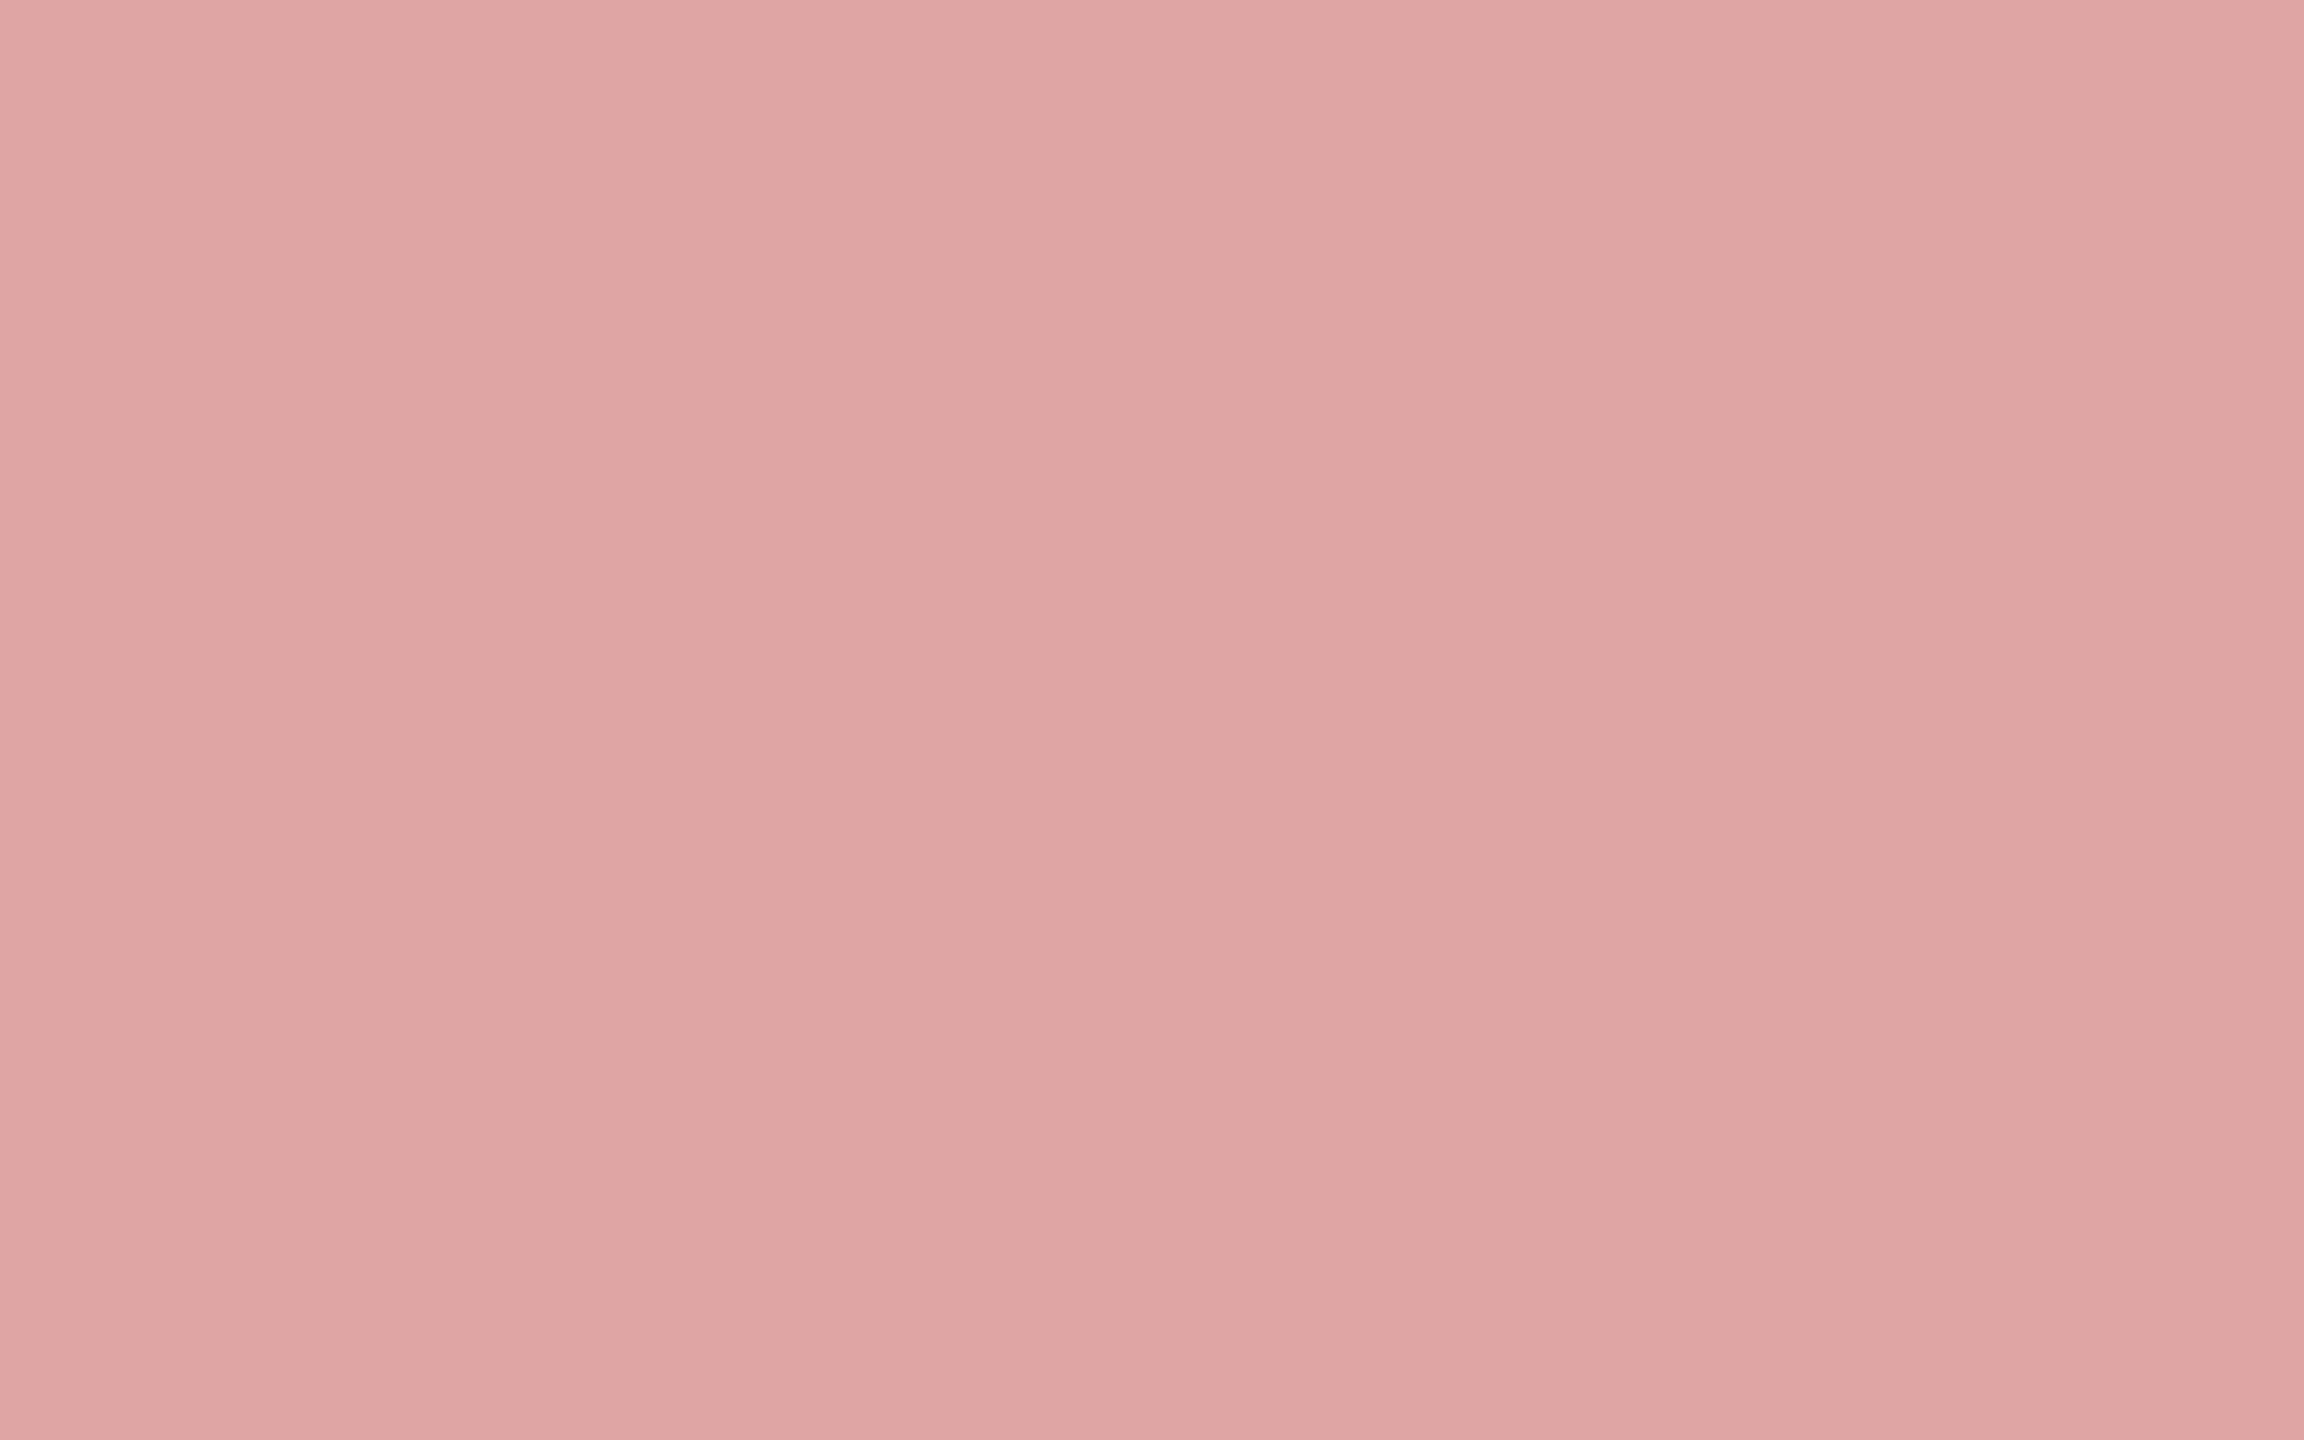 2304x1440 Pastel Pink Solid Color Background